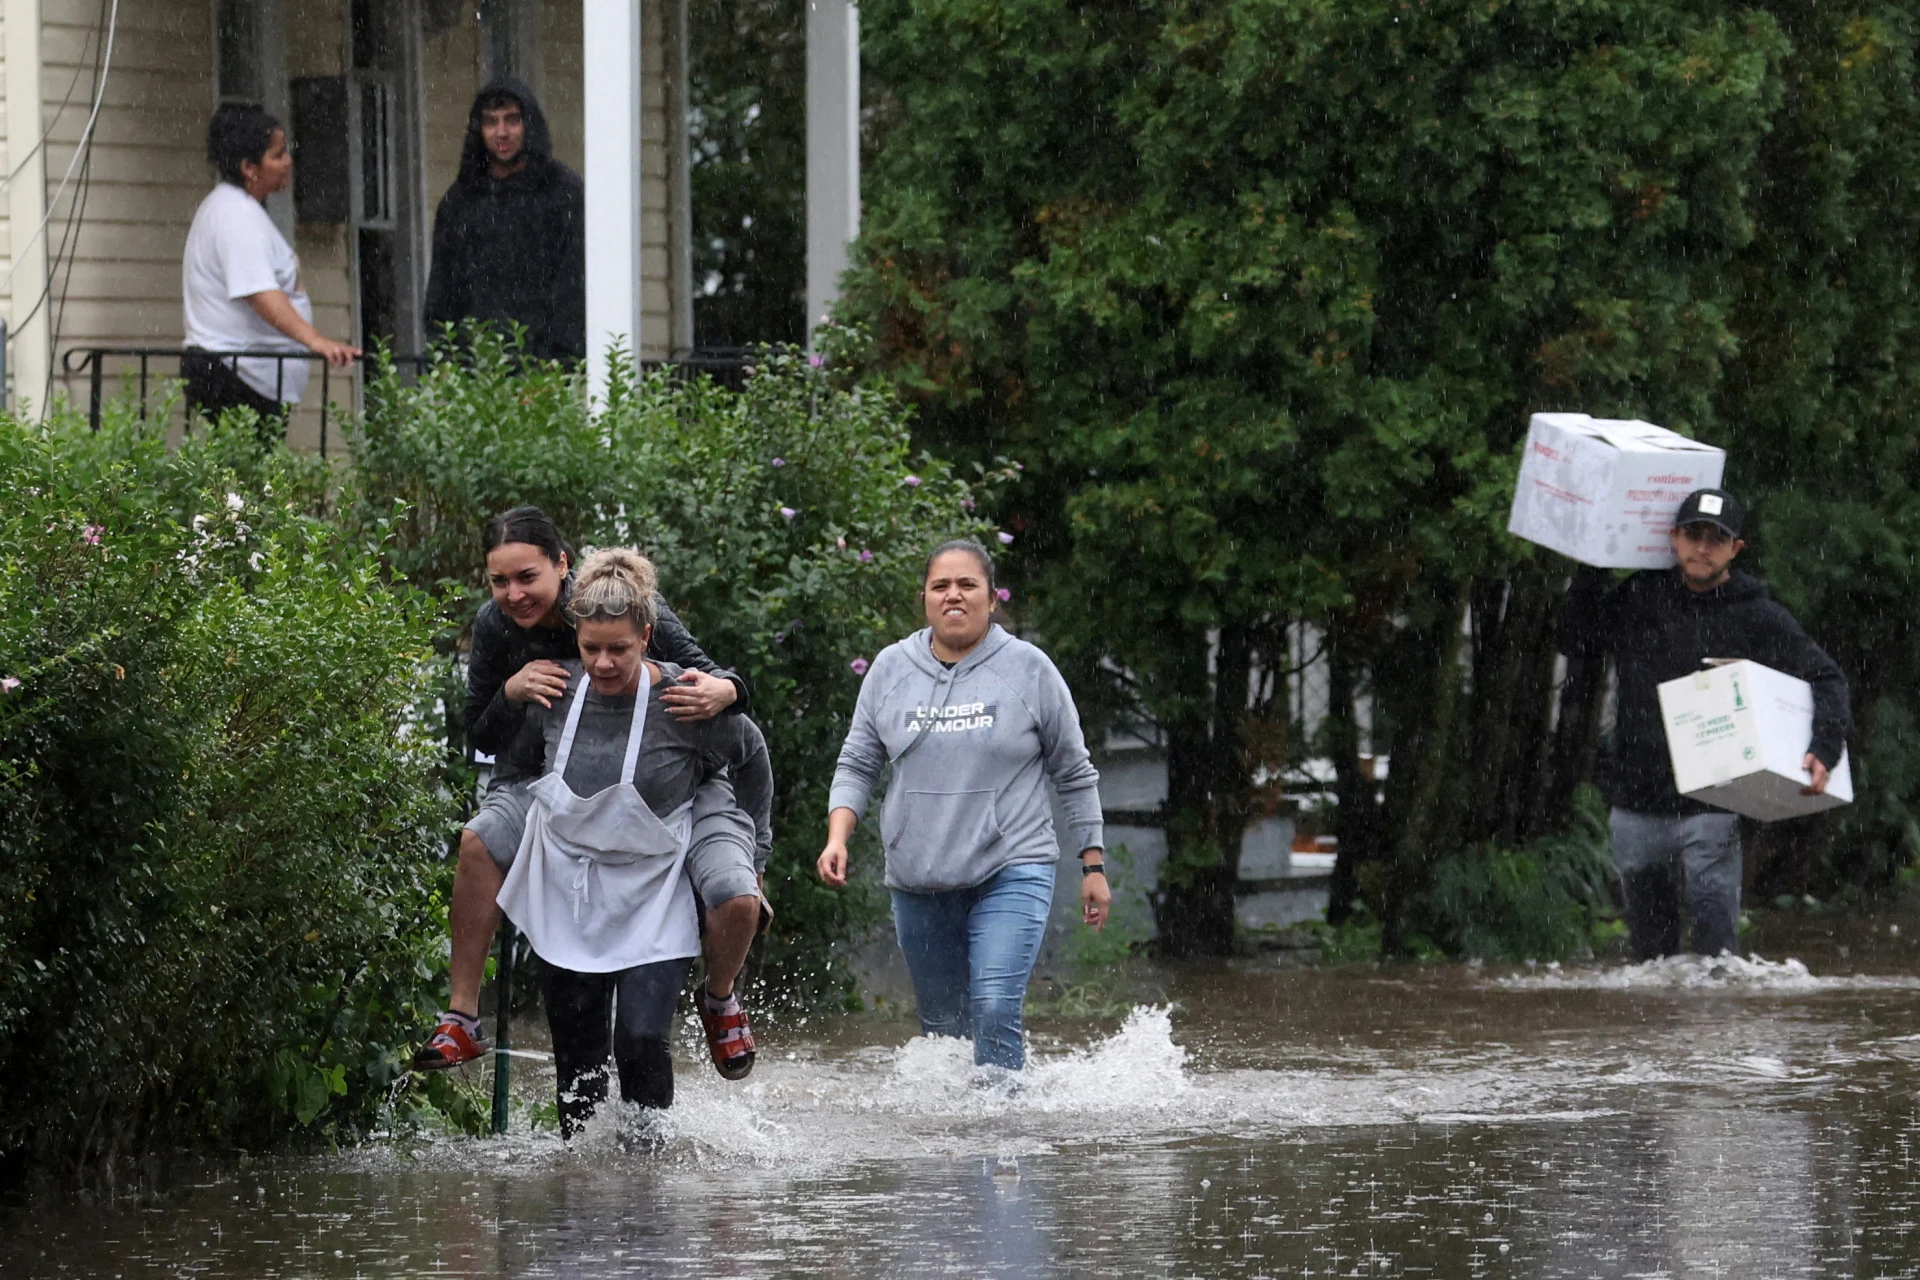  Source: Reuters Residents walk through floodwaters during a heavy rain storm in the New York City suburb of Mamaroneck in Westchester County, New York, U.S., September 29, 2023. REUTERS/Mike Segar TPX IMAGES OF THE DAY